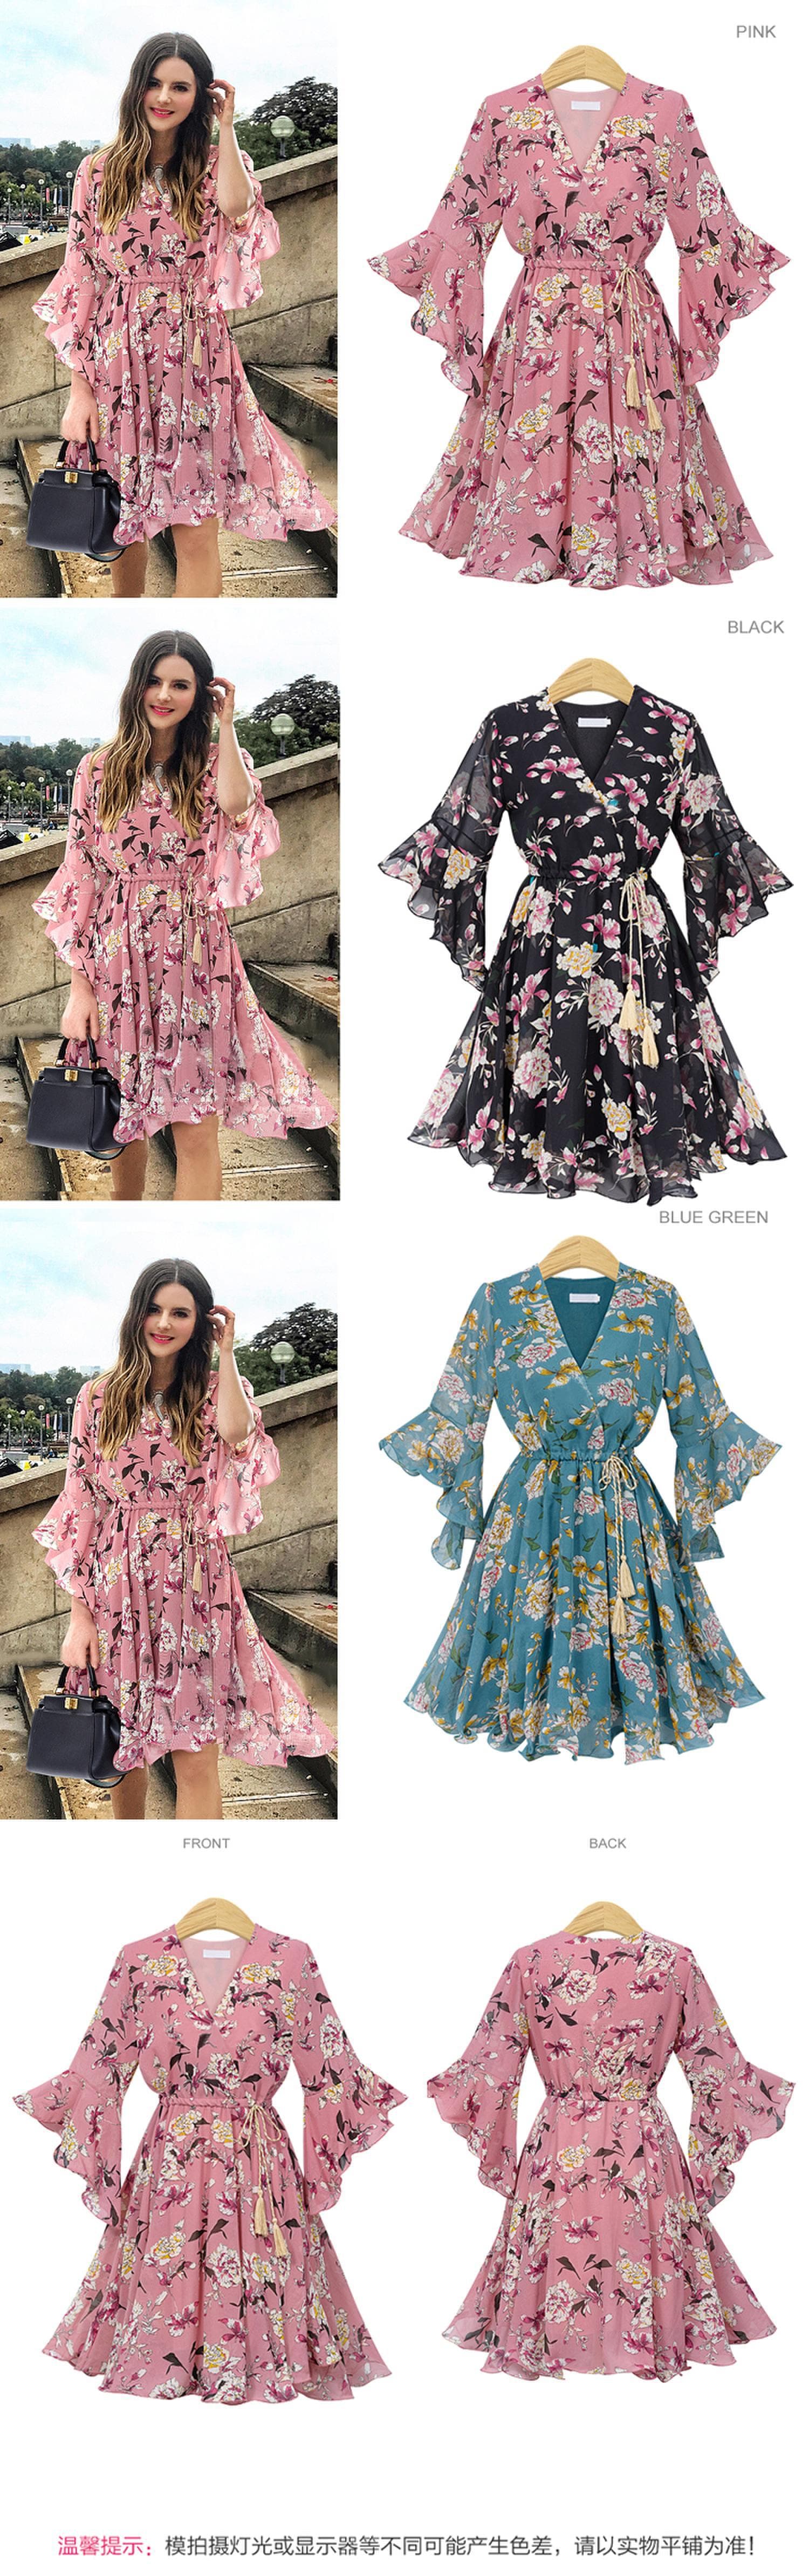 Spruced Roost Women's Clothing Chiffon Butterfly Sleeve Garden Dress - M-5XL - 3 Colors